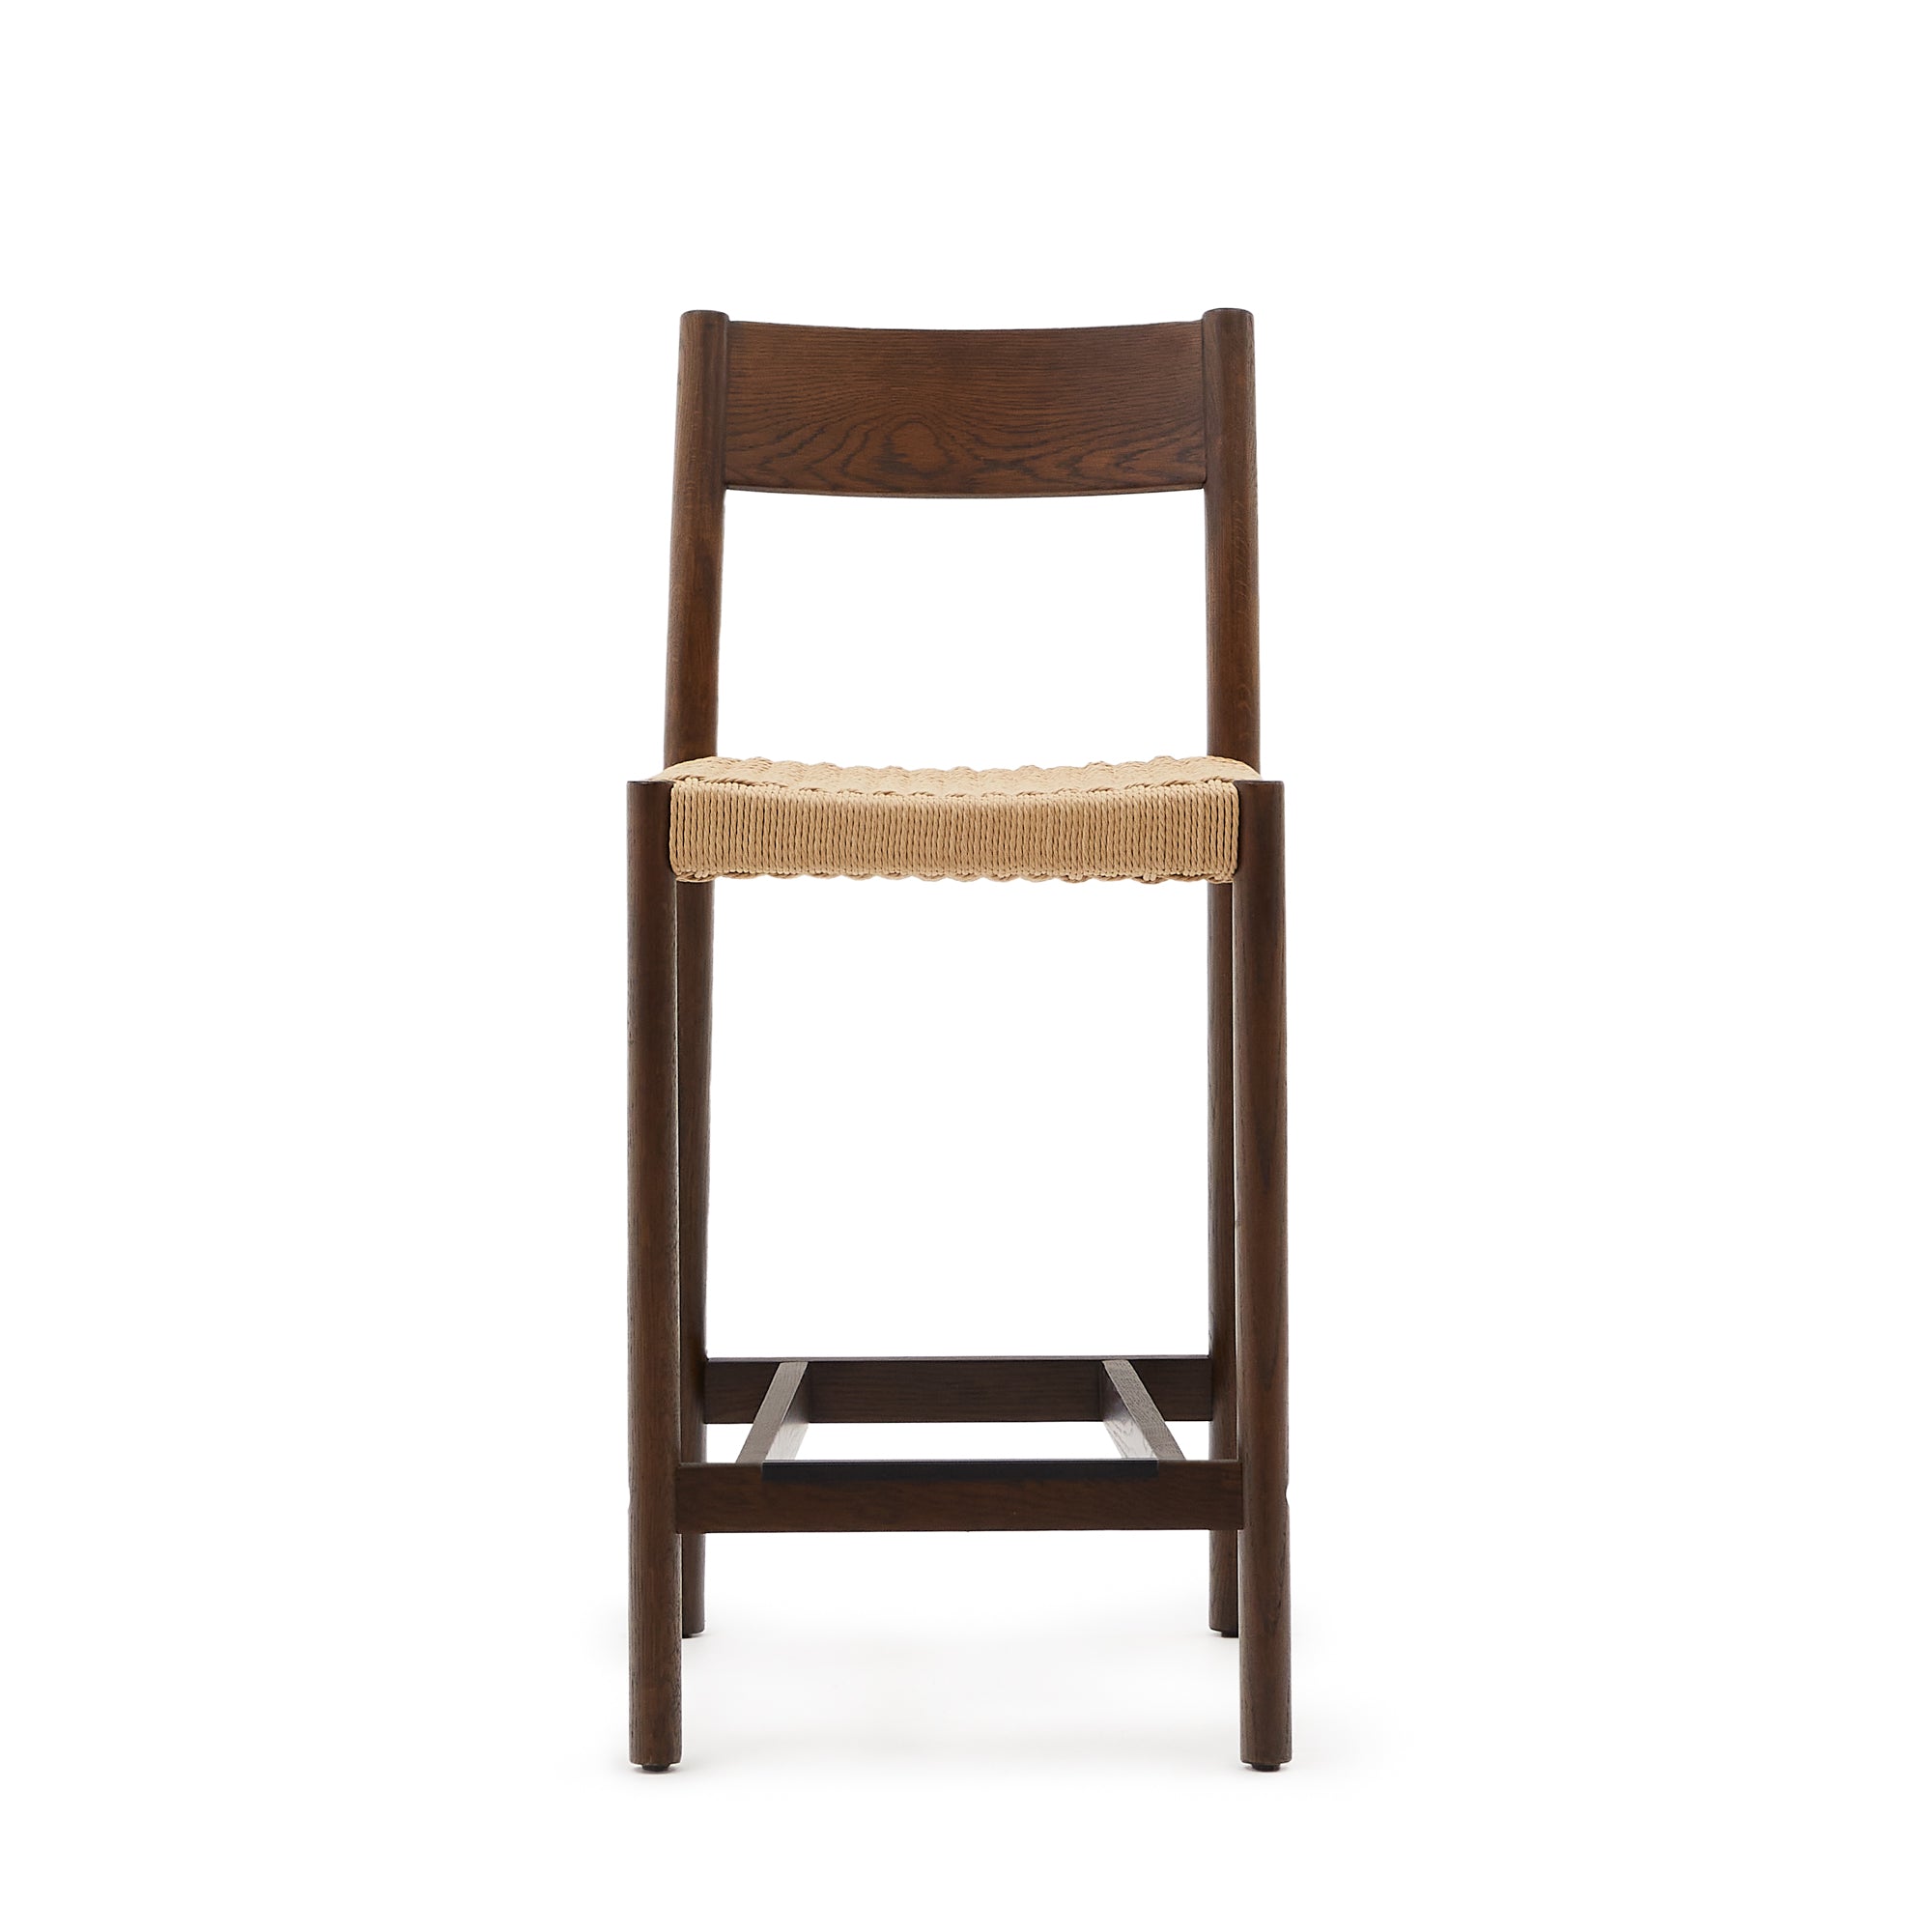 Yalia chair with back, solid oak with walnut finish and rope seat, 65 cm 100% FSC